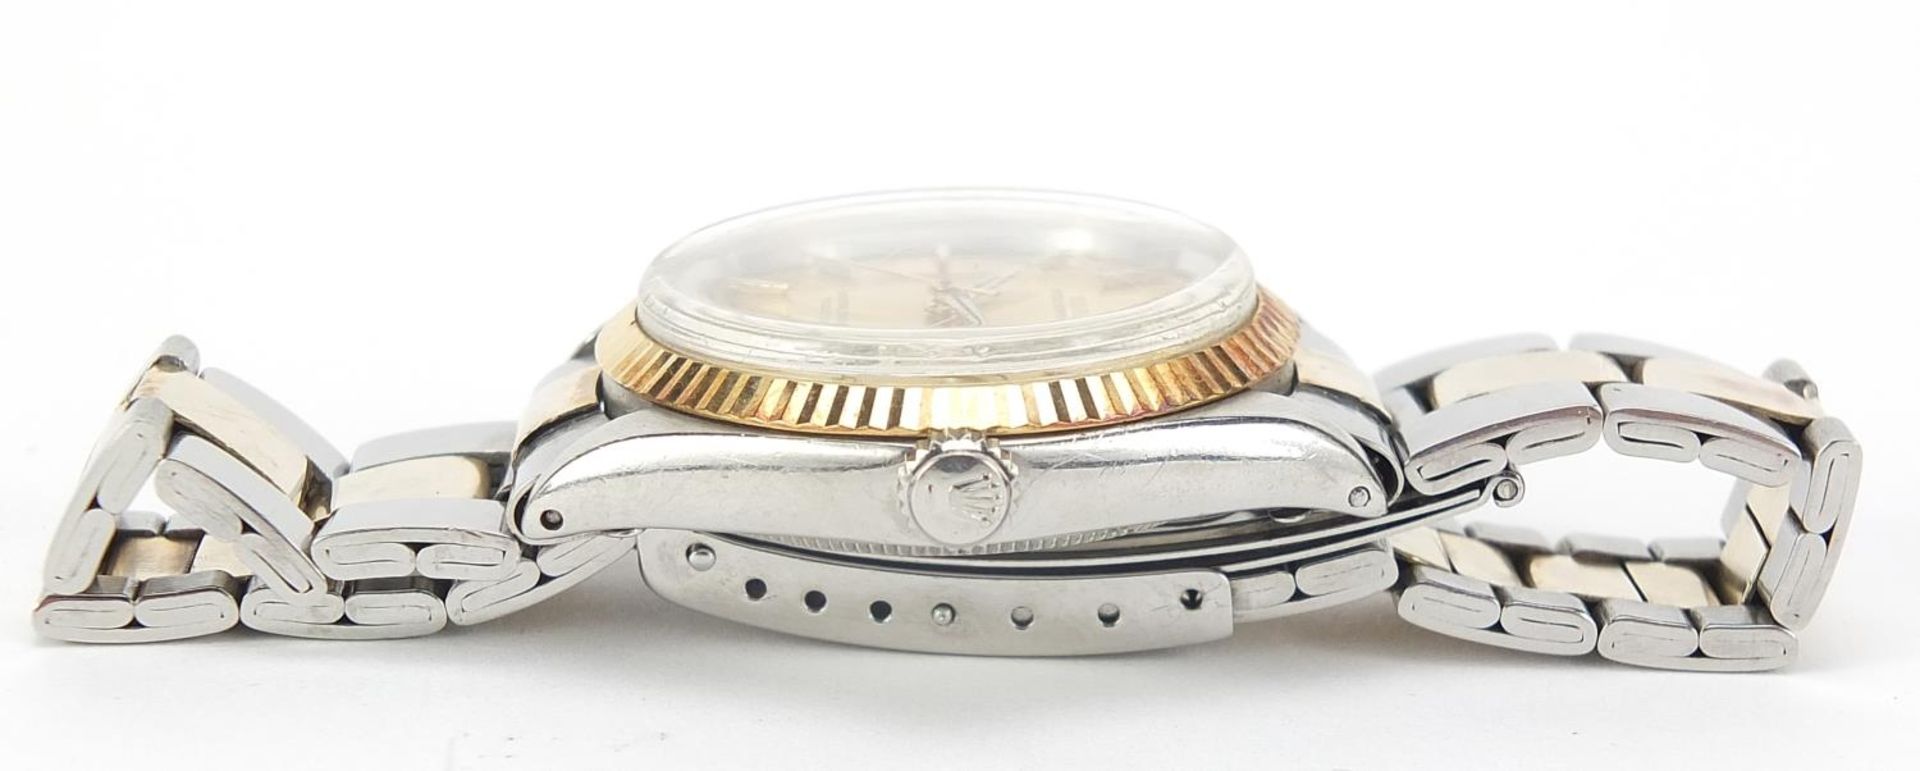 Rolex, gentlemen's Oyster Perpetual automatic wristwatch, 33.5mm in diameter : For Further Condition - Image 3 of 5